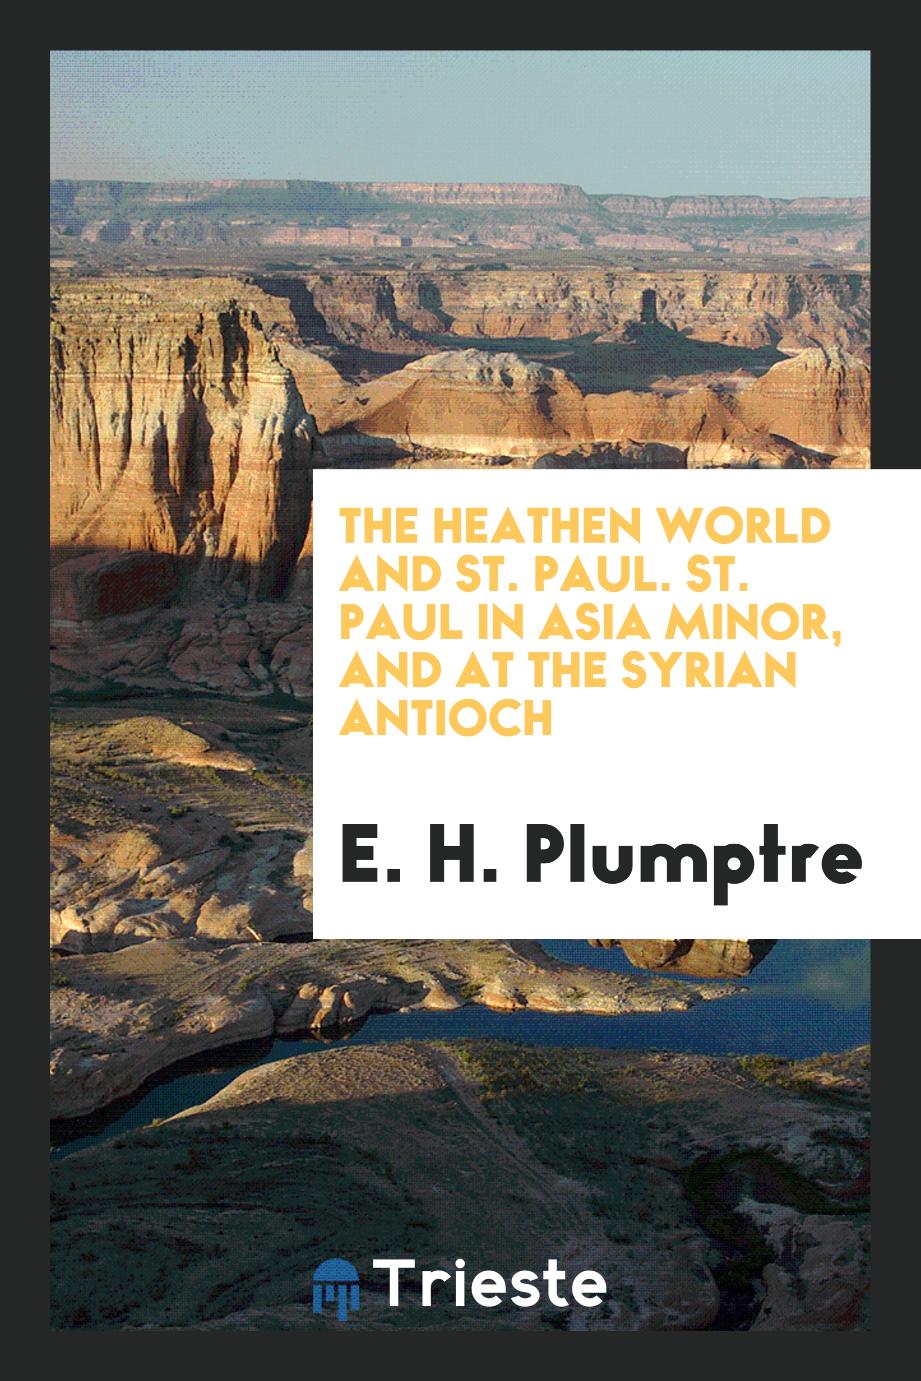 The Heathen World and St. Paul. St. Paul in Asia Minor, and at the Syrian Antioch